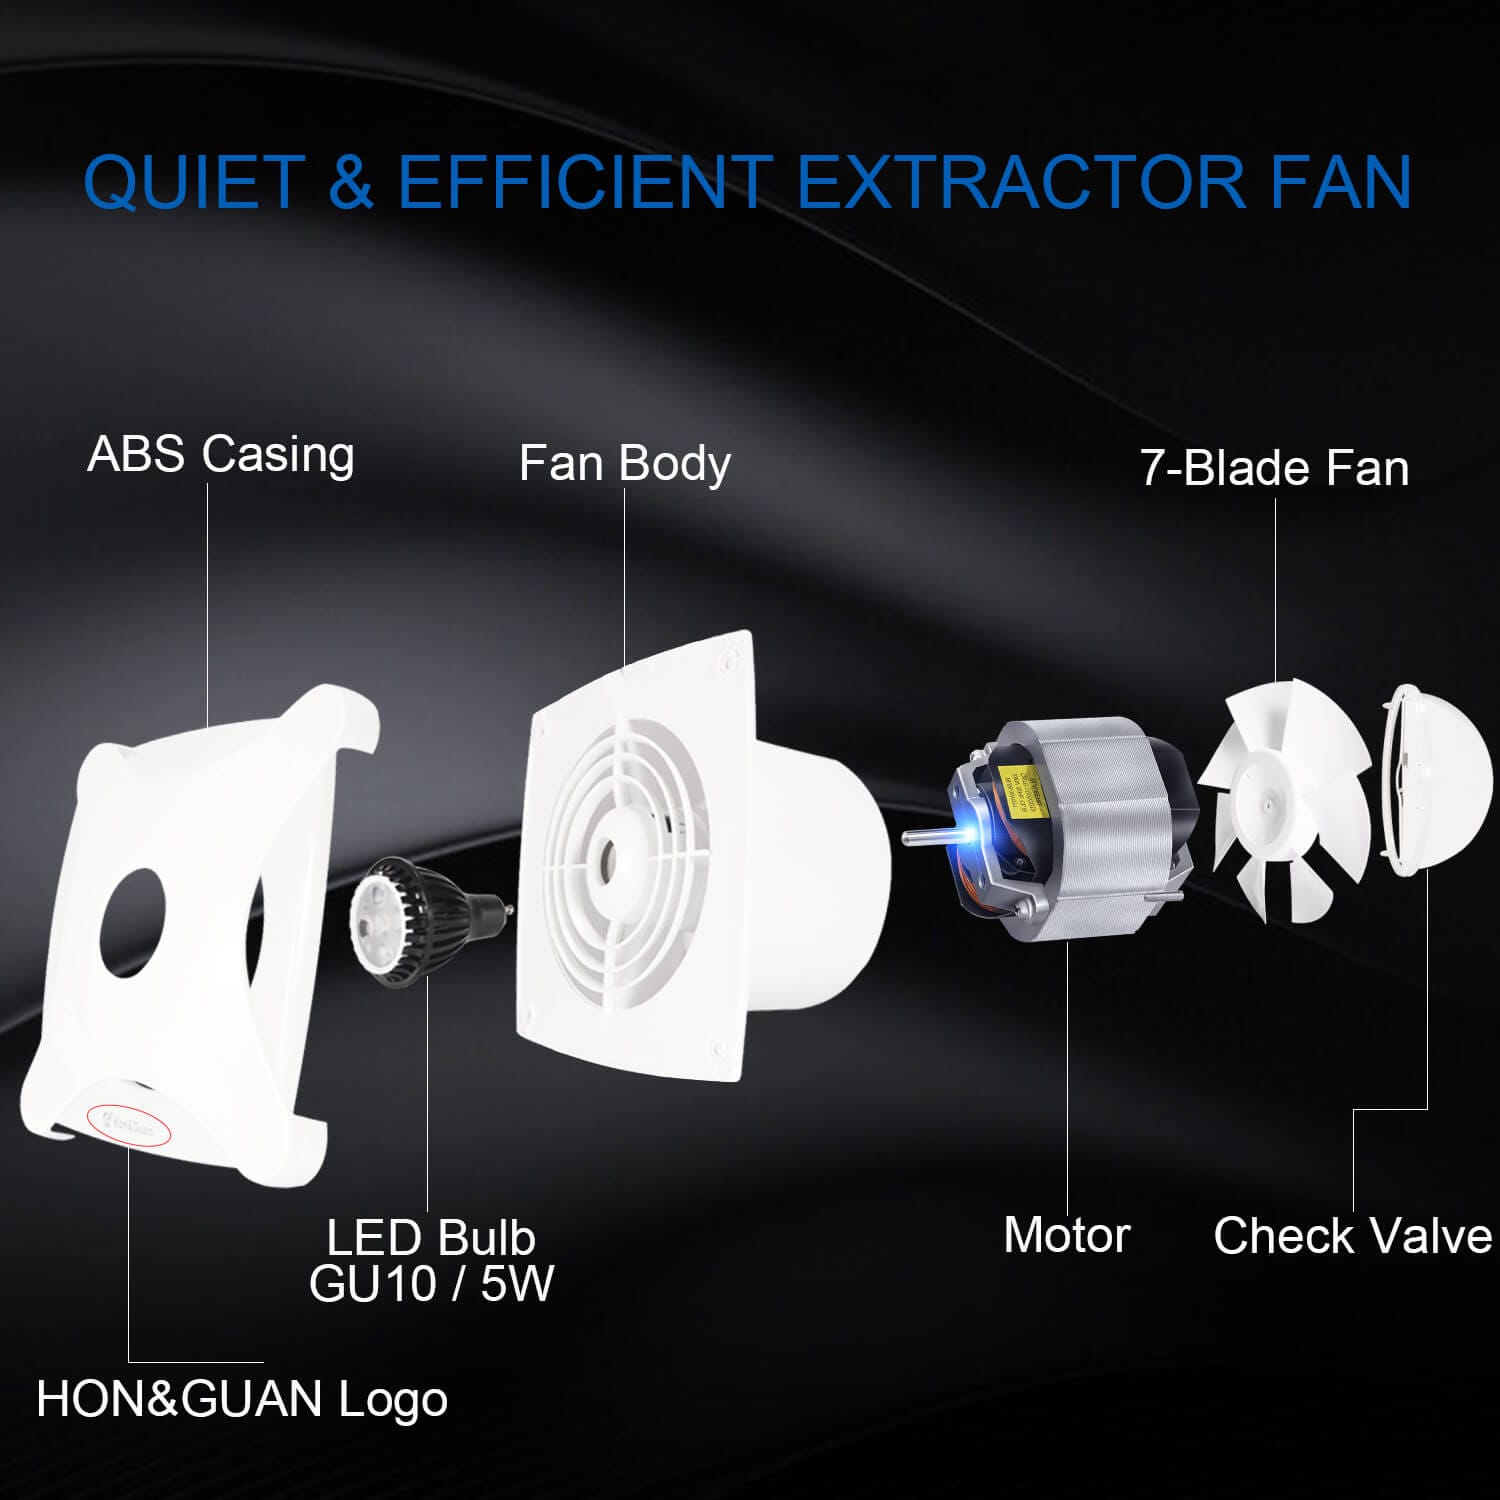 extractor fan with light